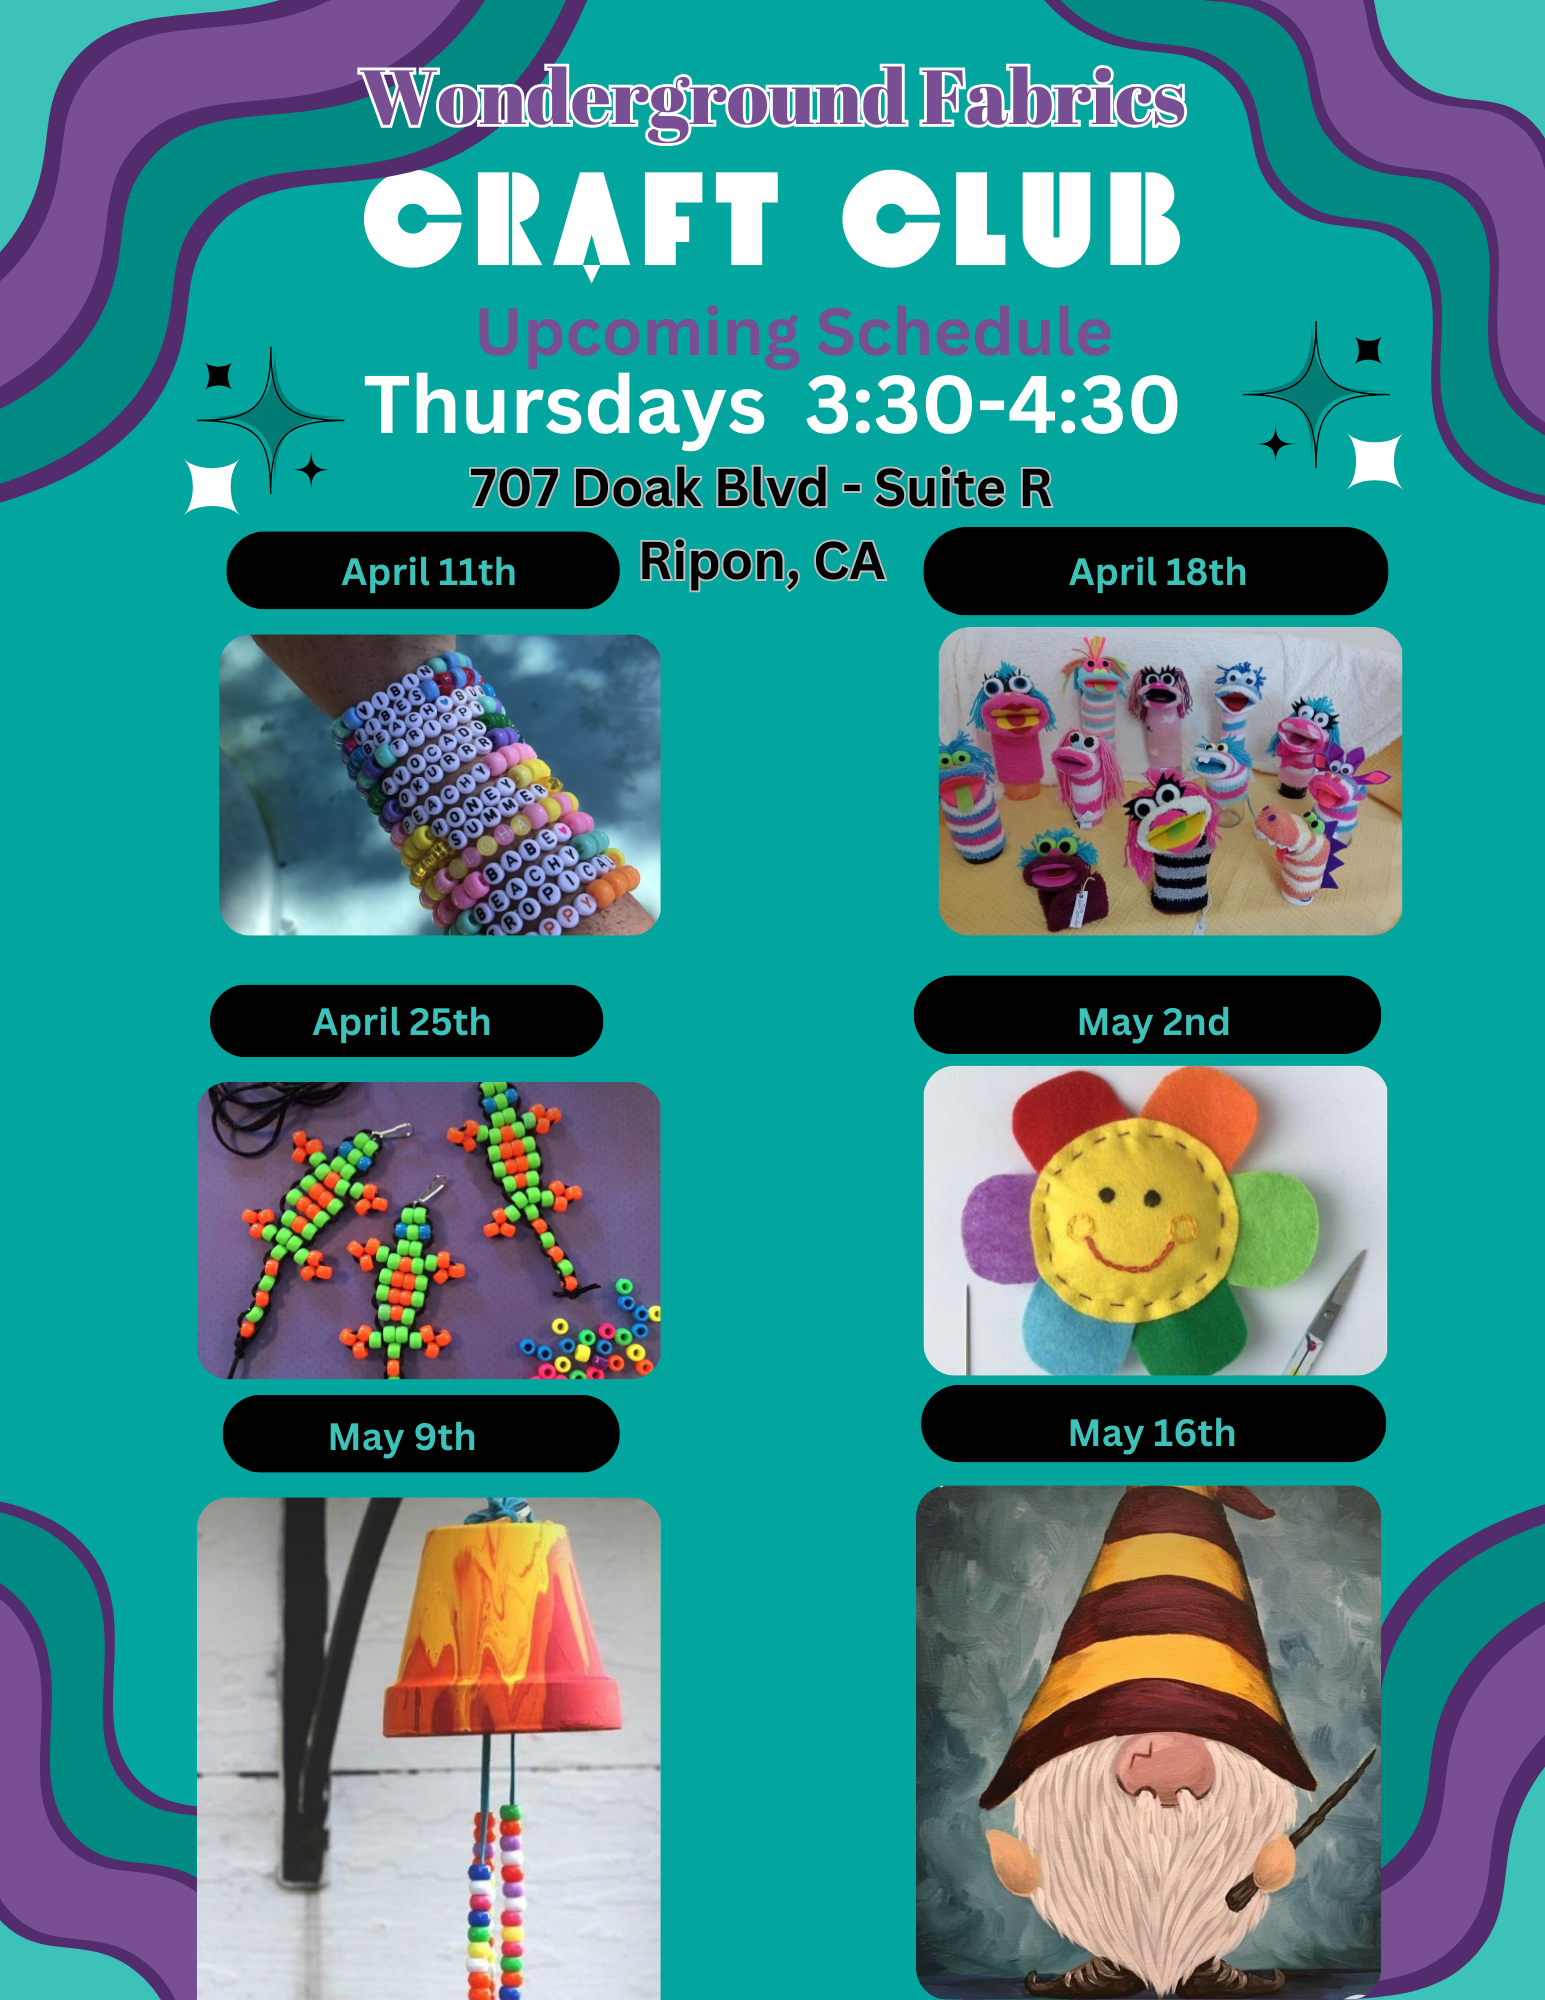 Kids Craft Club! Ages 5 and up - Every Thursday